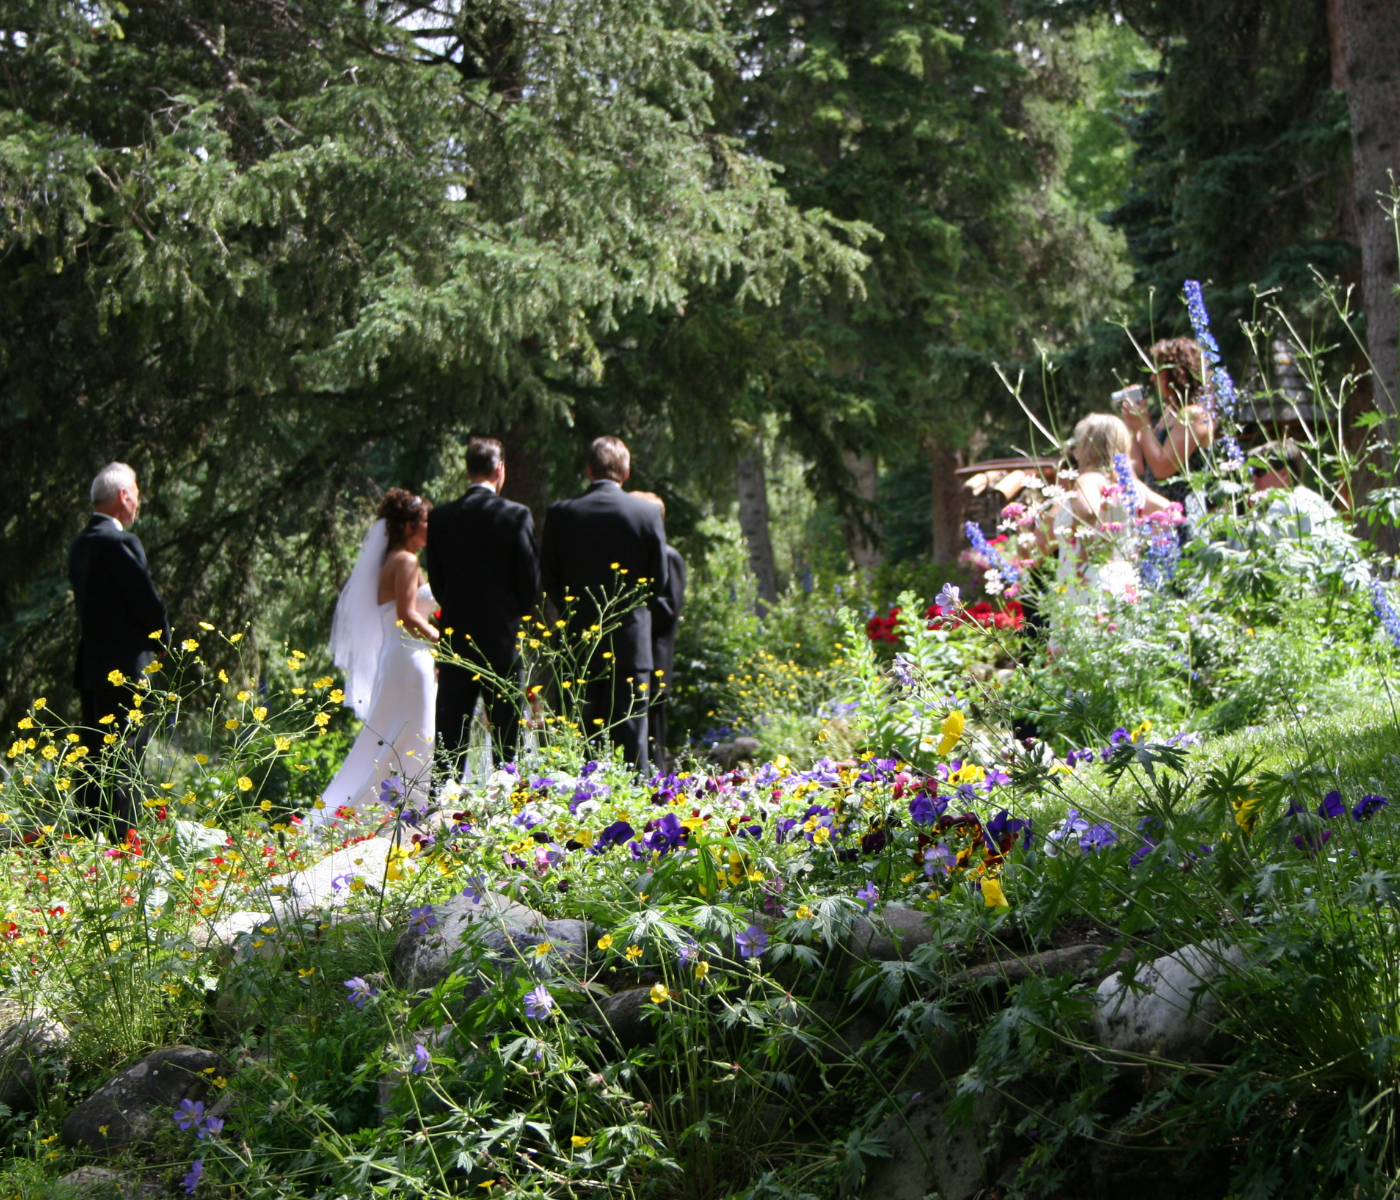 micro wedding outside in a garden in front of trees